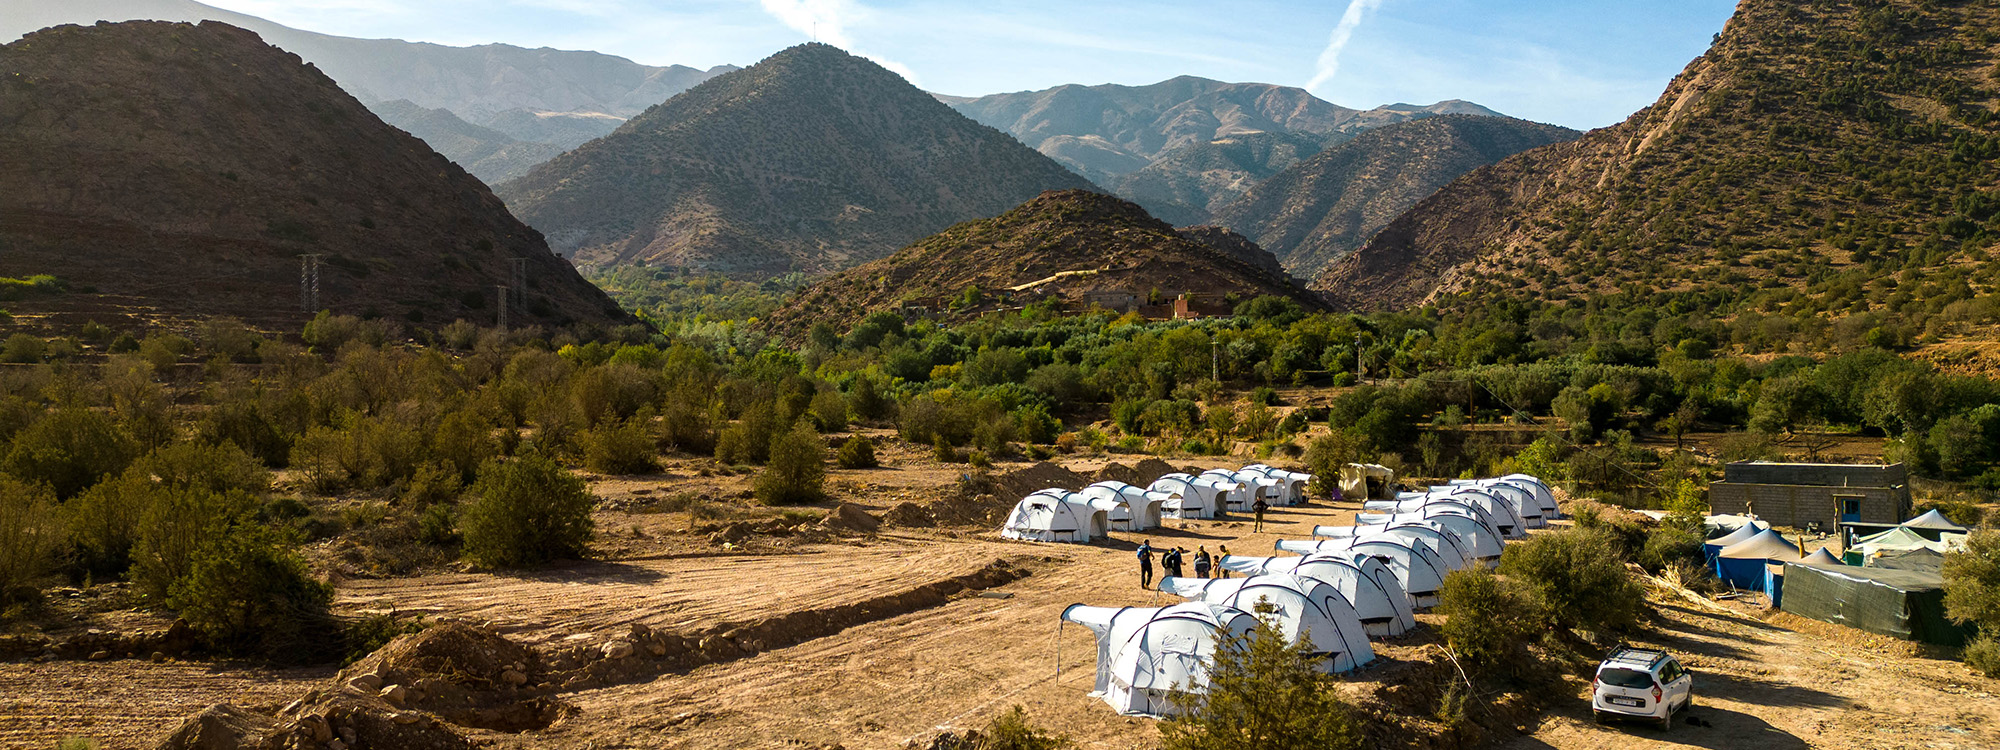 Aerial shot of landscape in Atlas Mountains in Morocco with ShelterBox tents